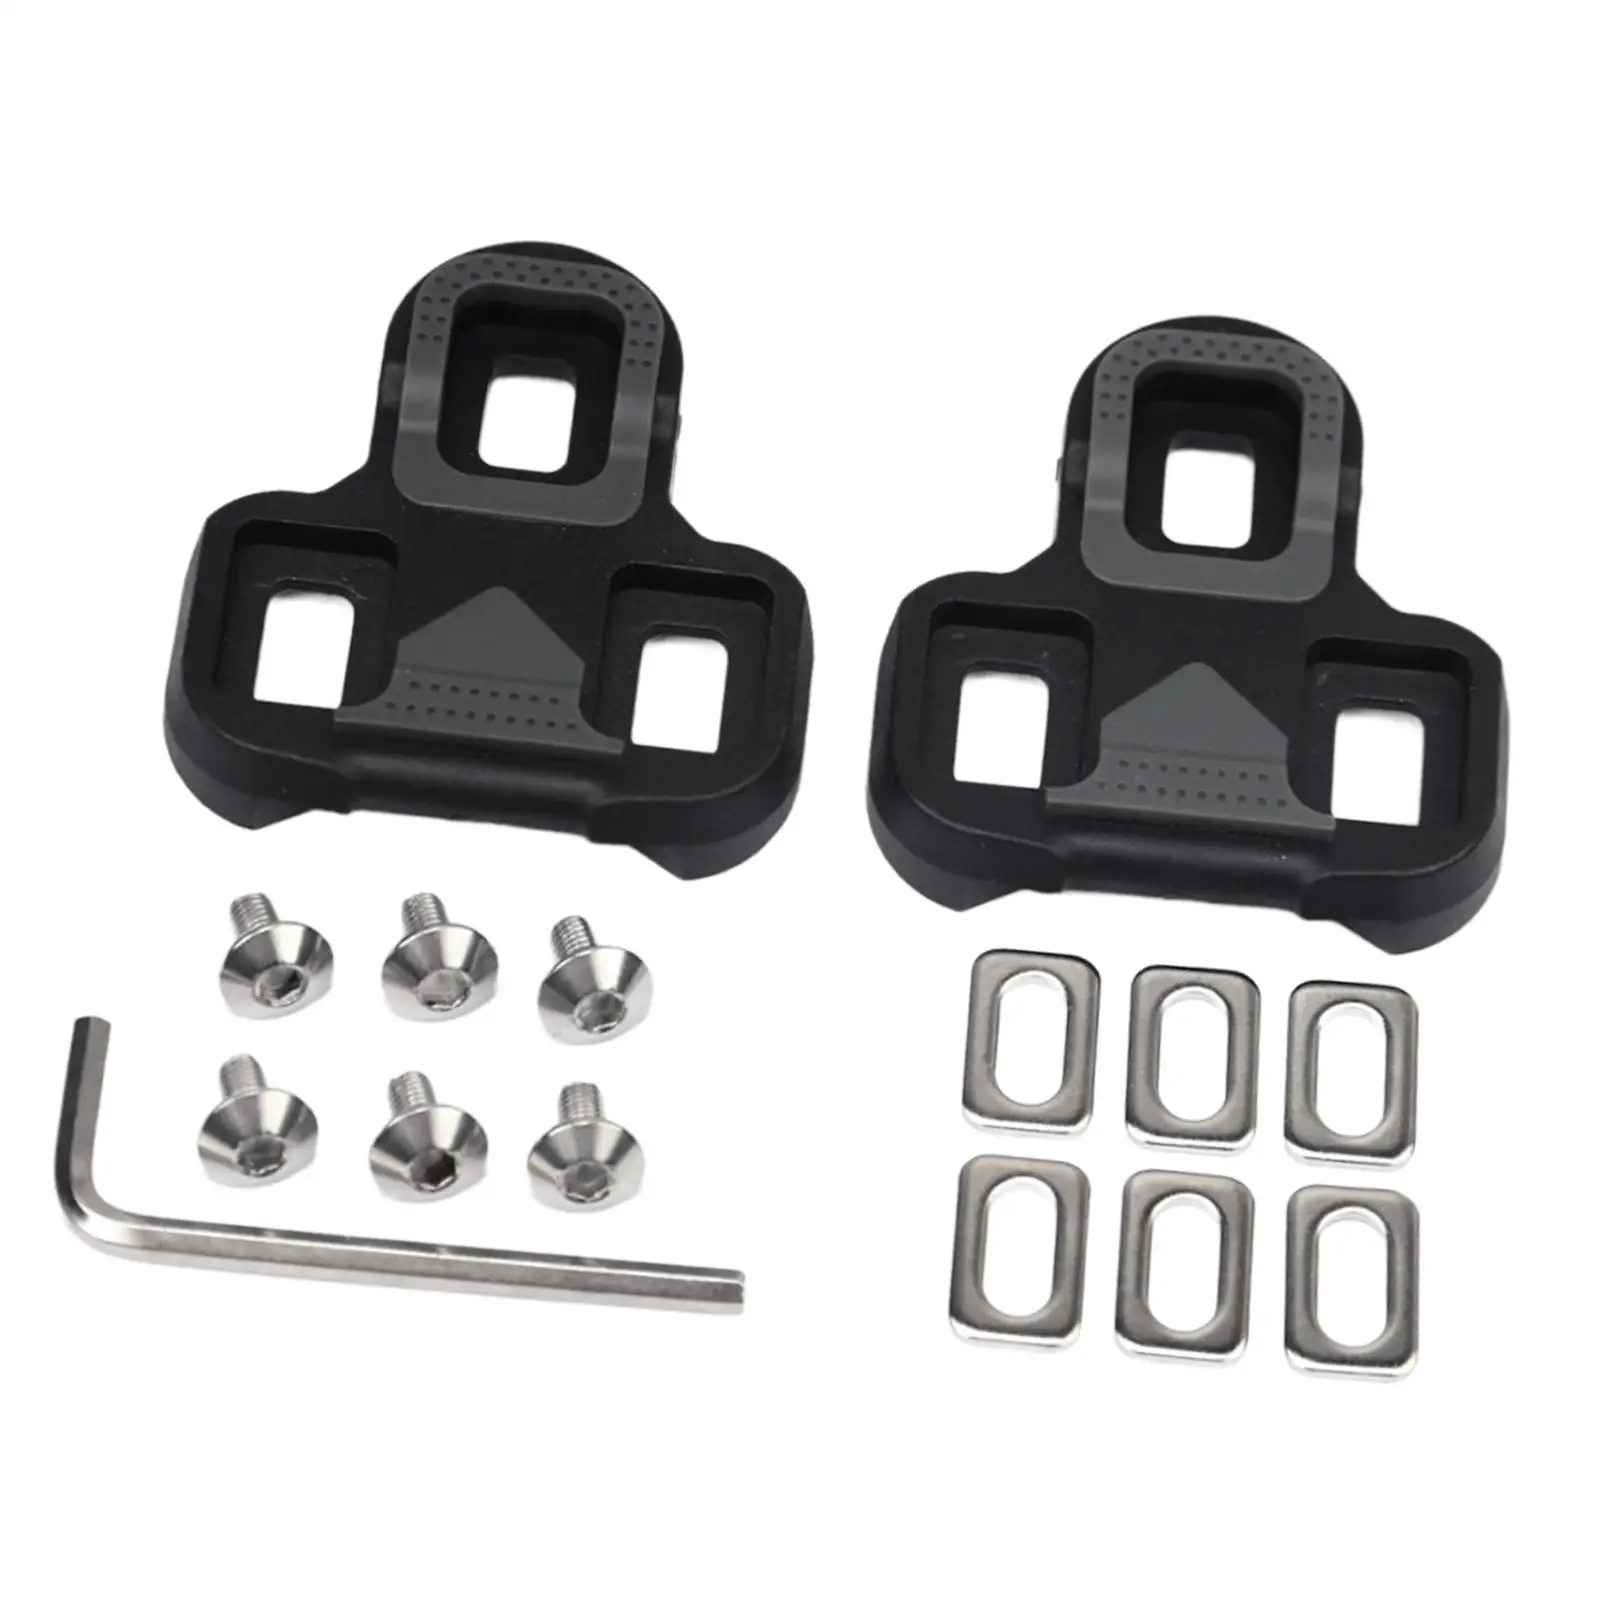 Road Bicycle Pedals Black Bicycle Cleats for Mountain Bicycle Indoor Outdoor